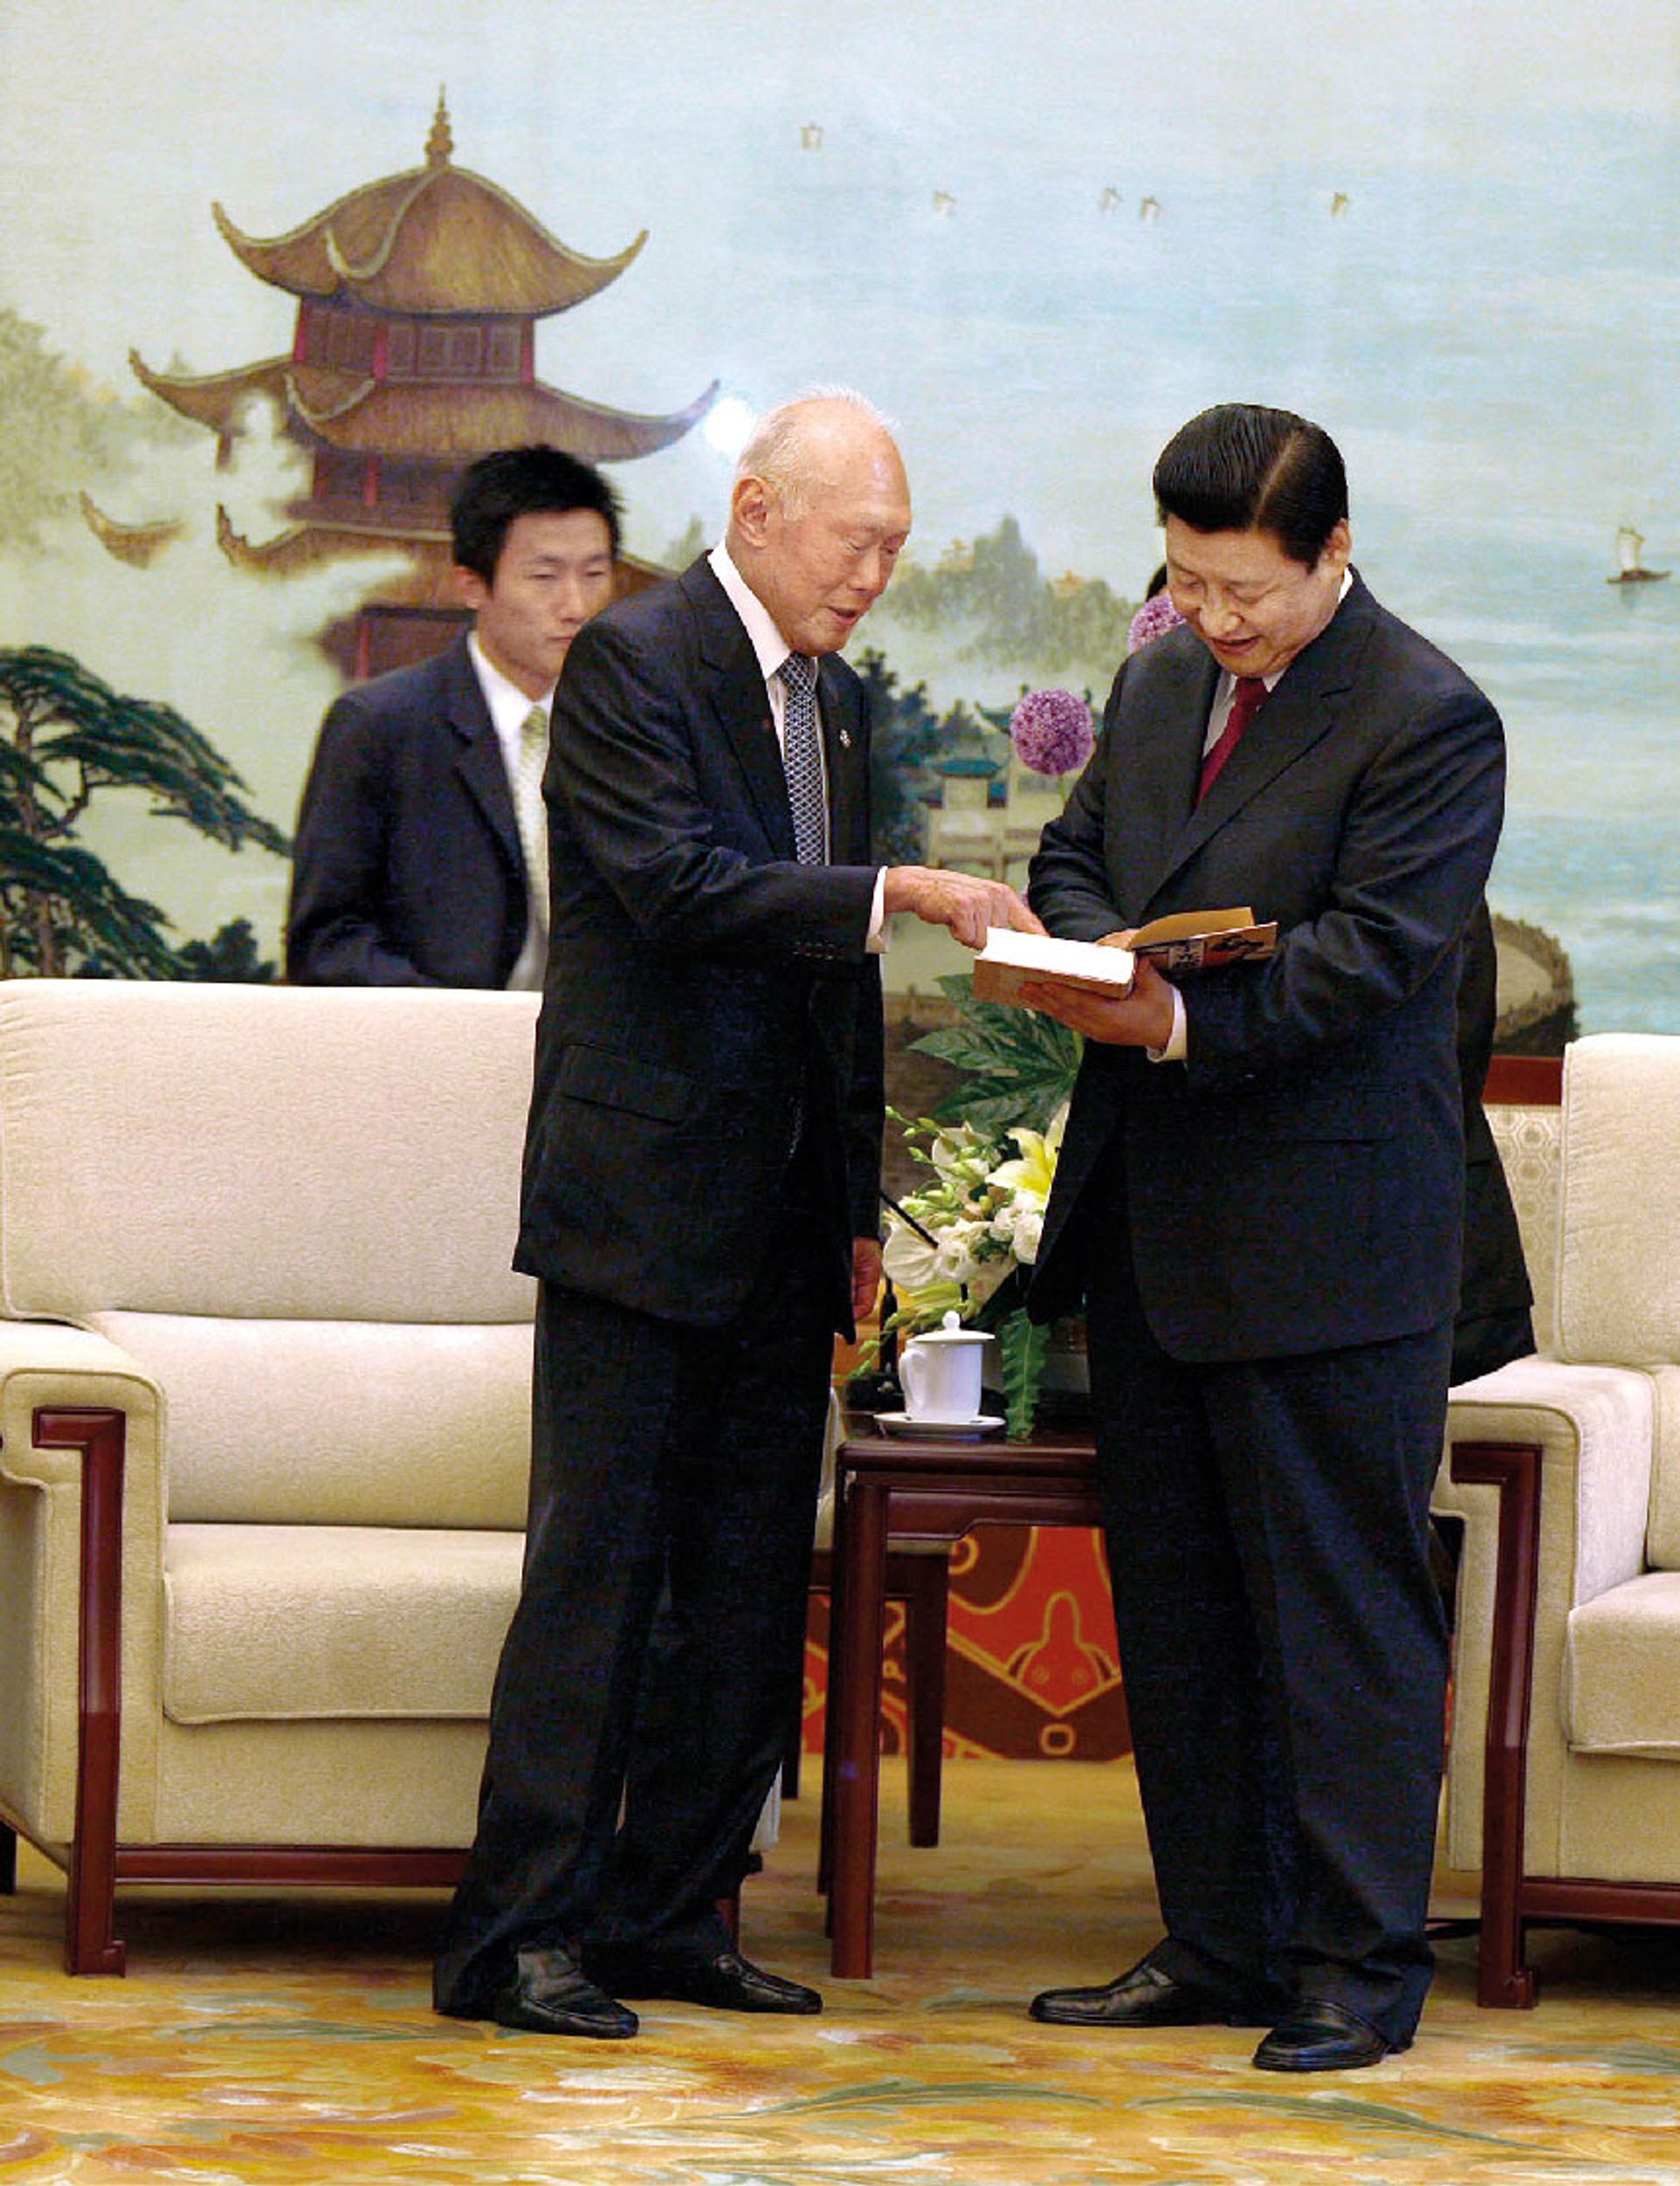 Mr Lee presenting a copy of his memoirs in Chinese to Vice-President of the People’s Republic of China Xi Jinping when they met during the Beijing Olympics in August 2008. Mr Xi became president in March 2013. ST Photo: Chua Chin Hon